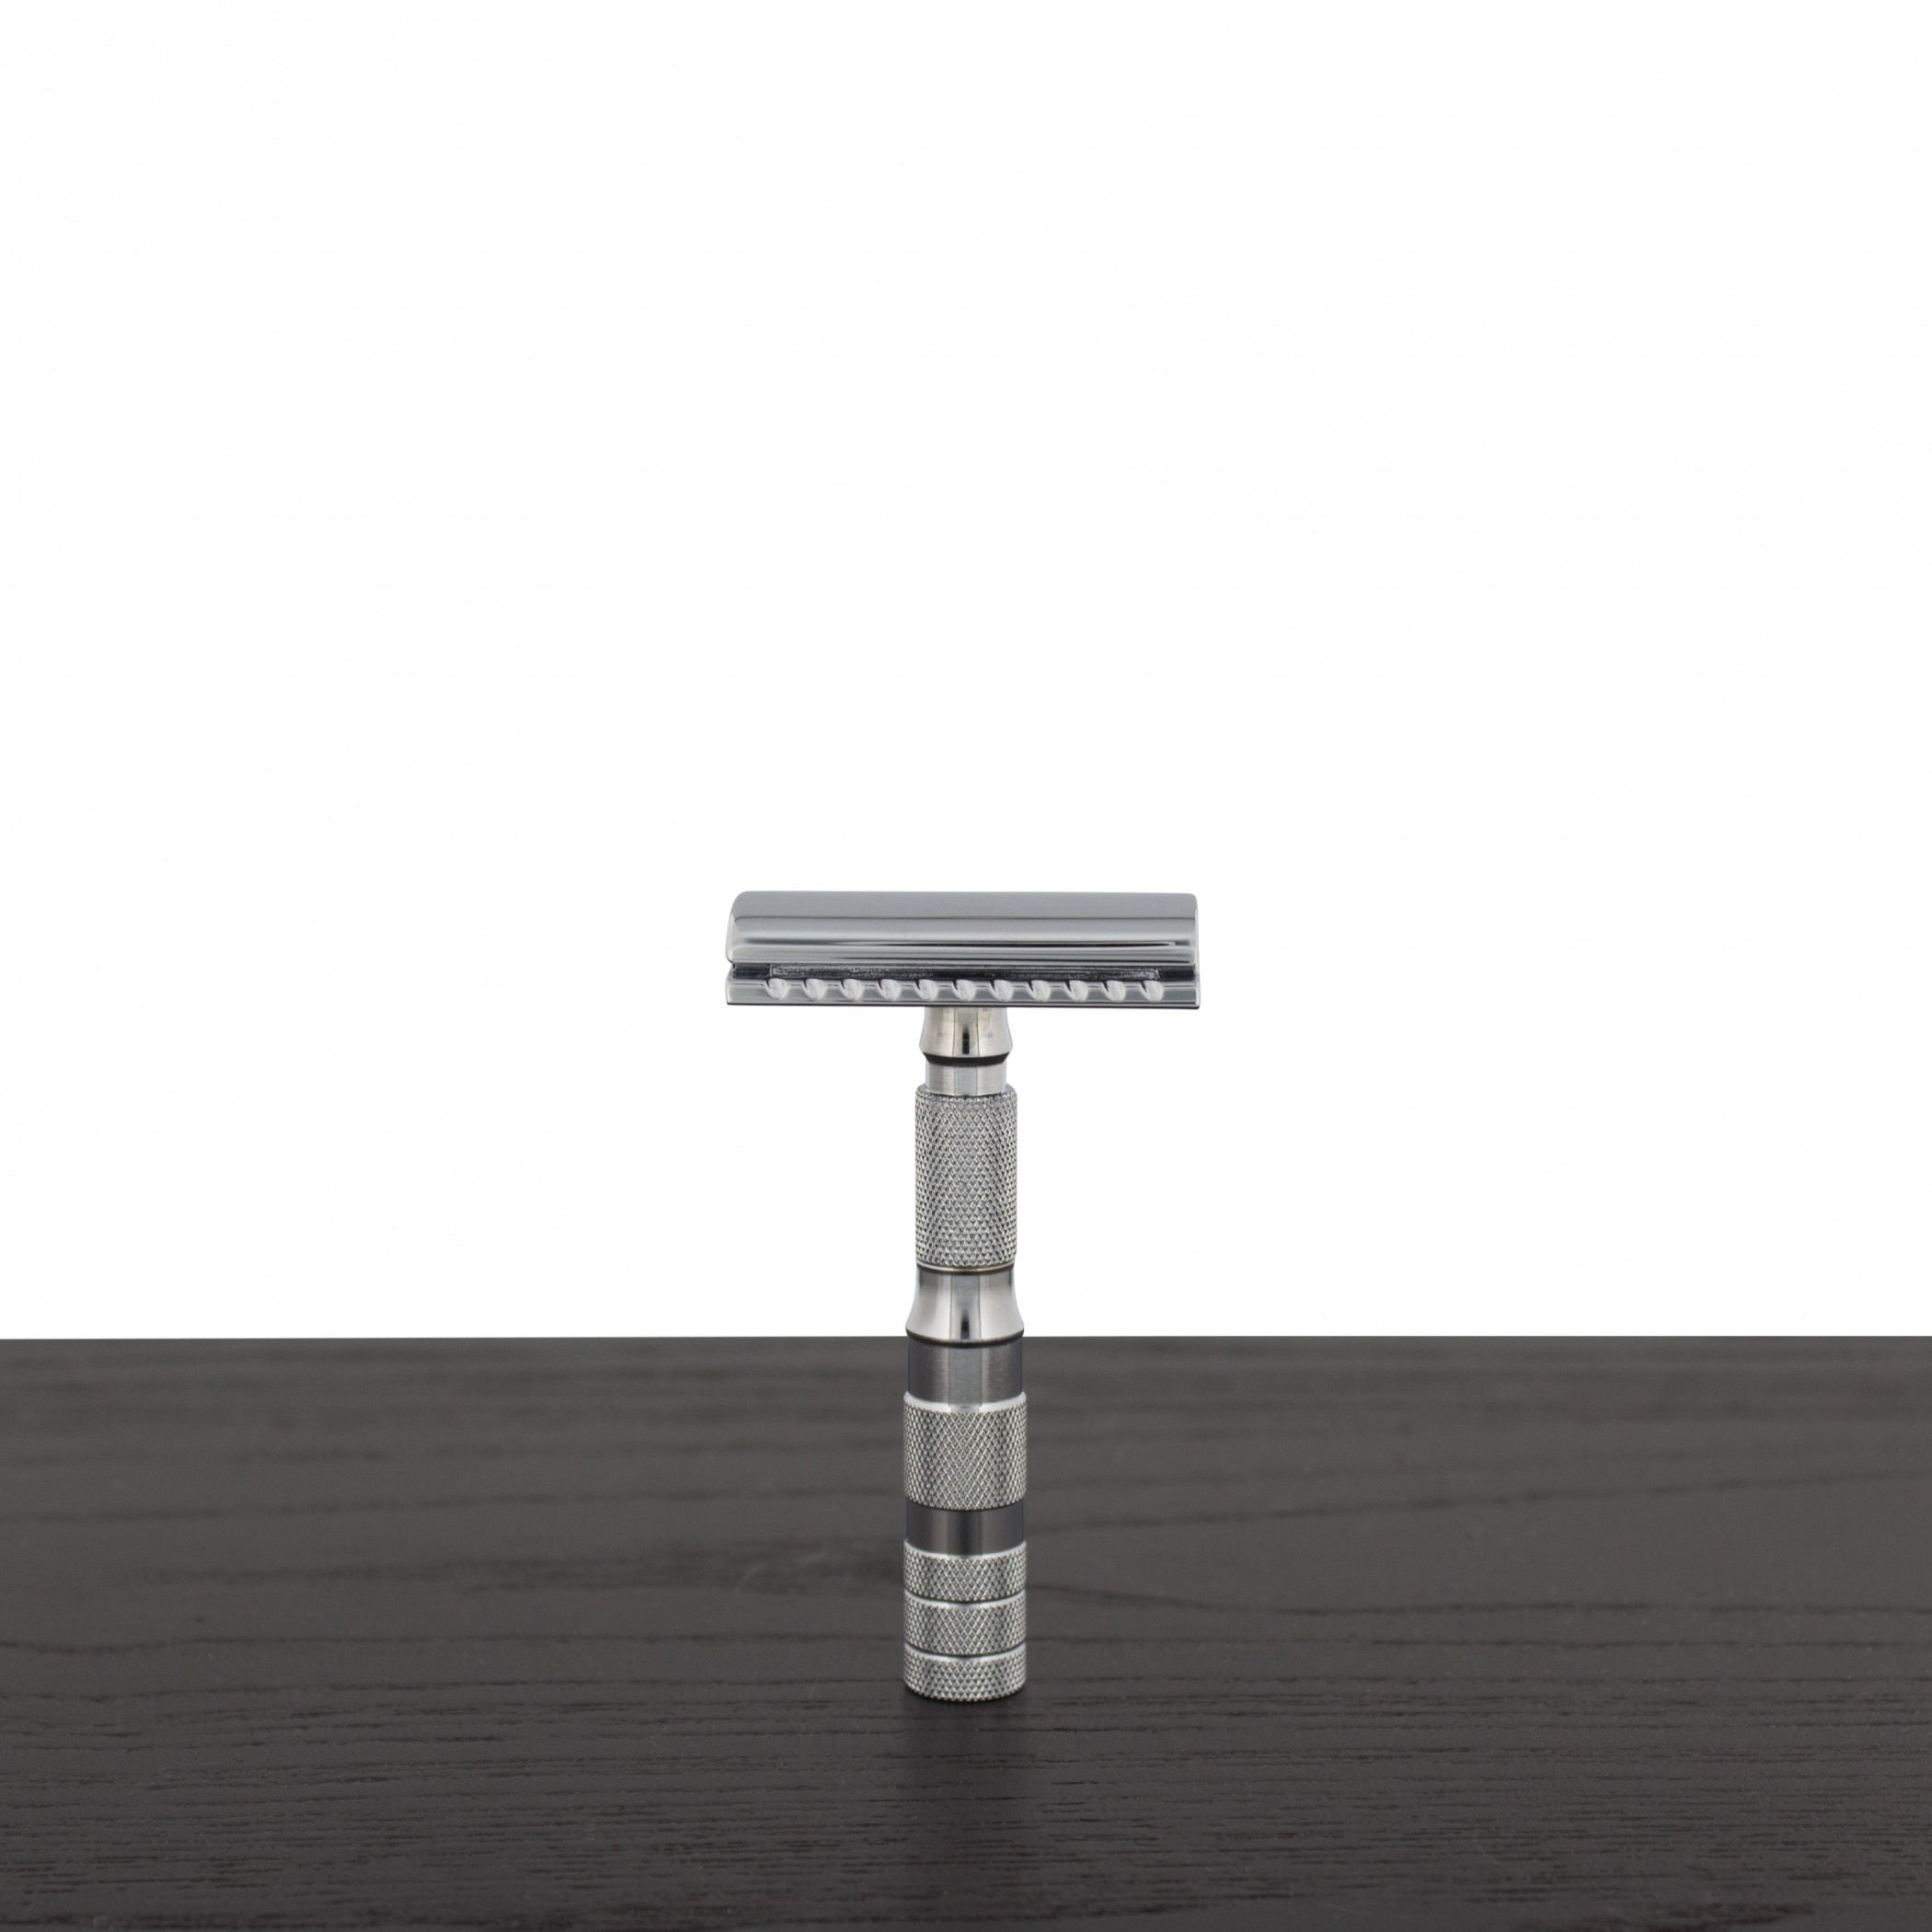 Product image 0 for Merkur Travel Safety Razor with Bar